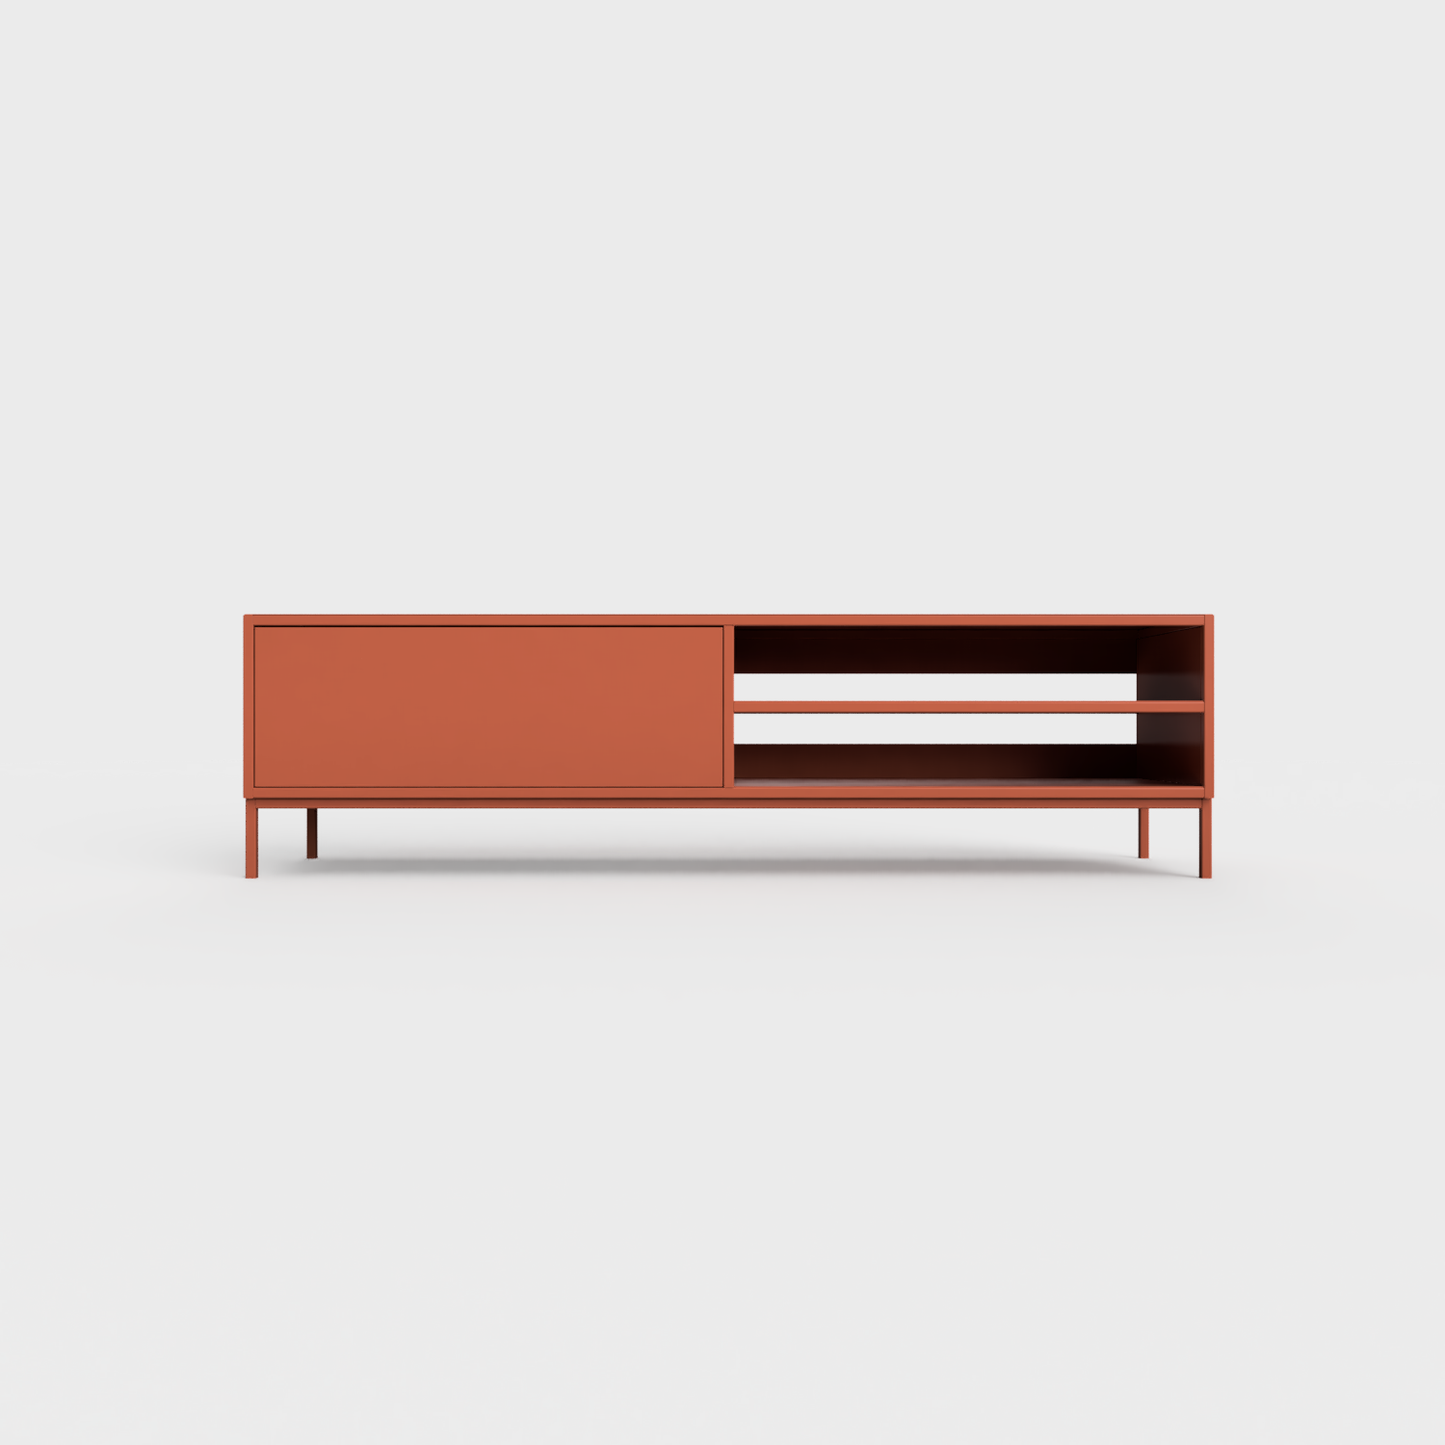 Prunus 02 Lowboard in Brick color, powder-coated steel, elegant and modern piece of furniture for your living room